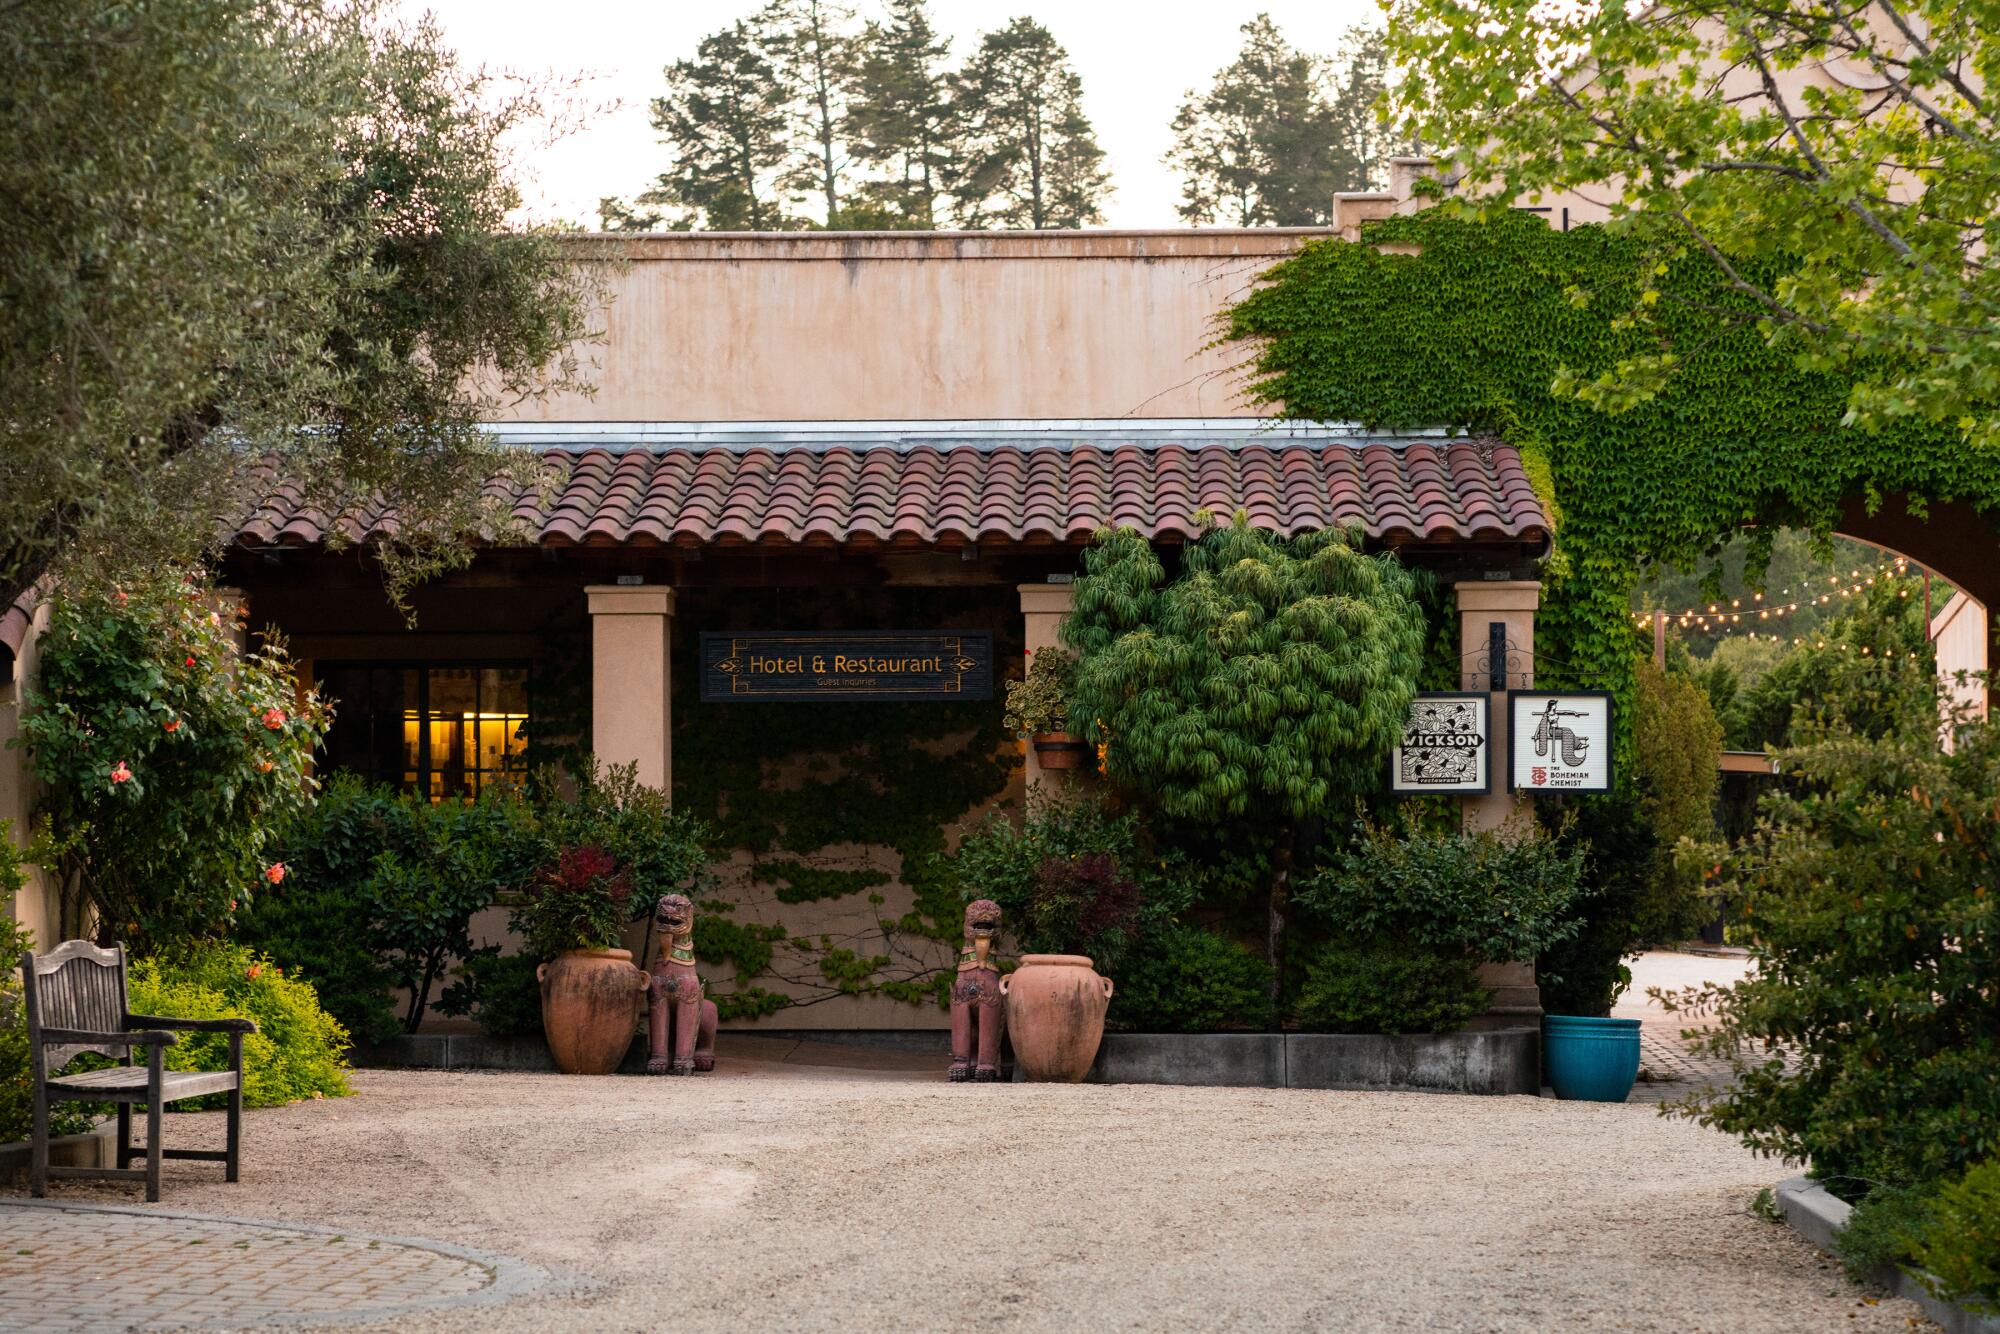 The exterior of a boutique hotel with a stucco tile roof and surrounded by lush greenery.